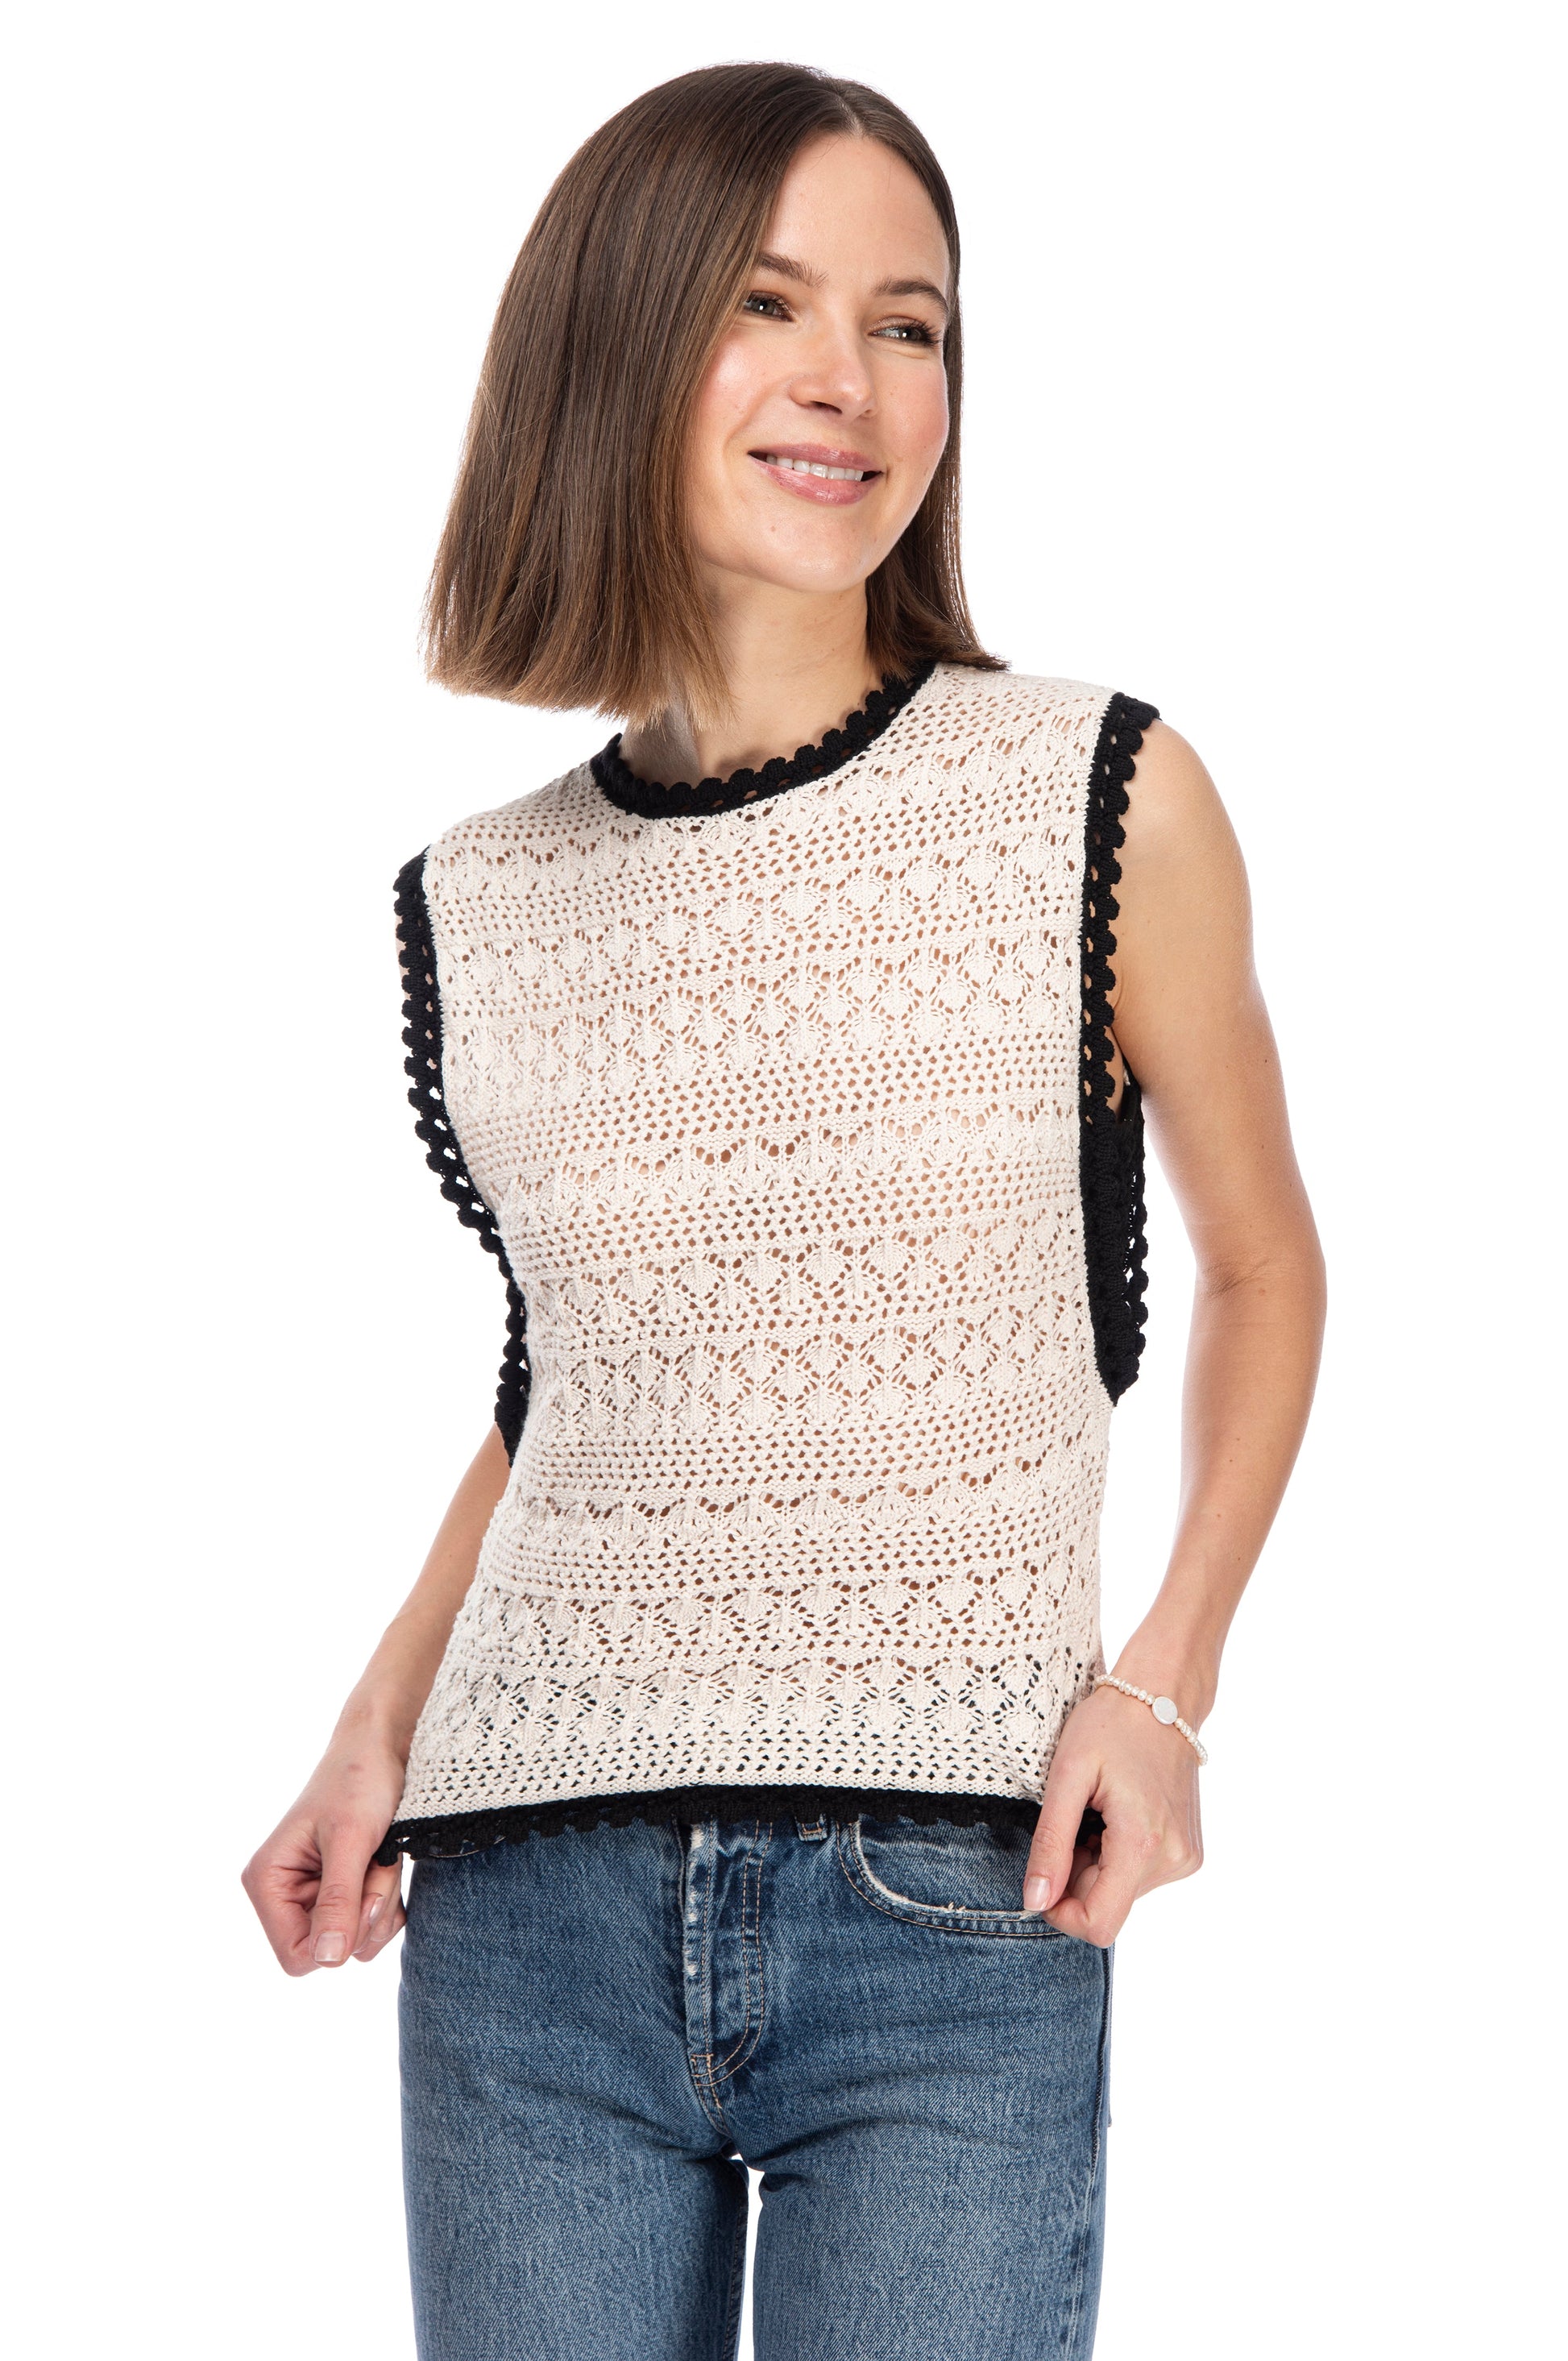 A woman in a beige SLVLSS CROCHET SWEATER TOP by B Collection by Bobeau with black trim and blue jeans standing against a white background, smiling gently.